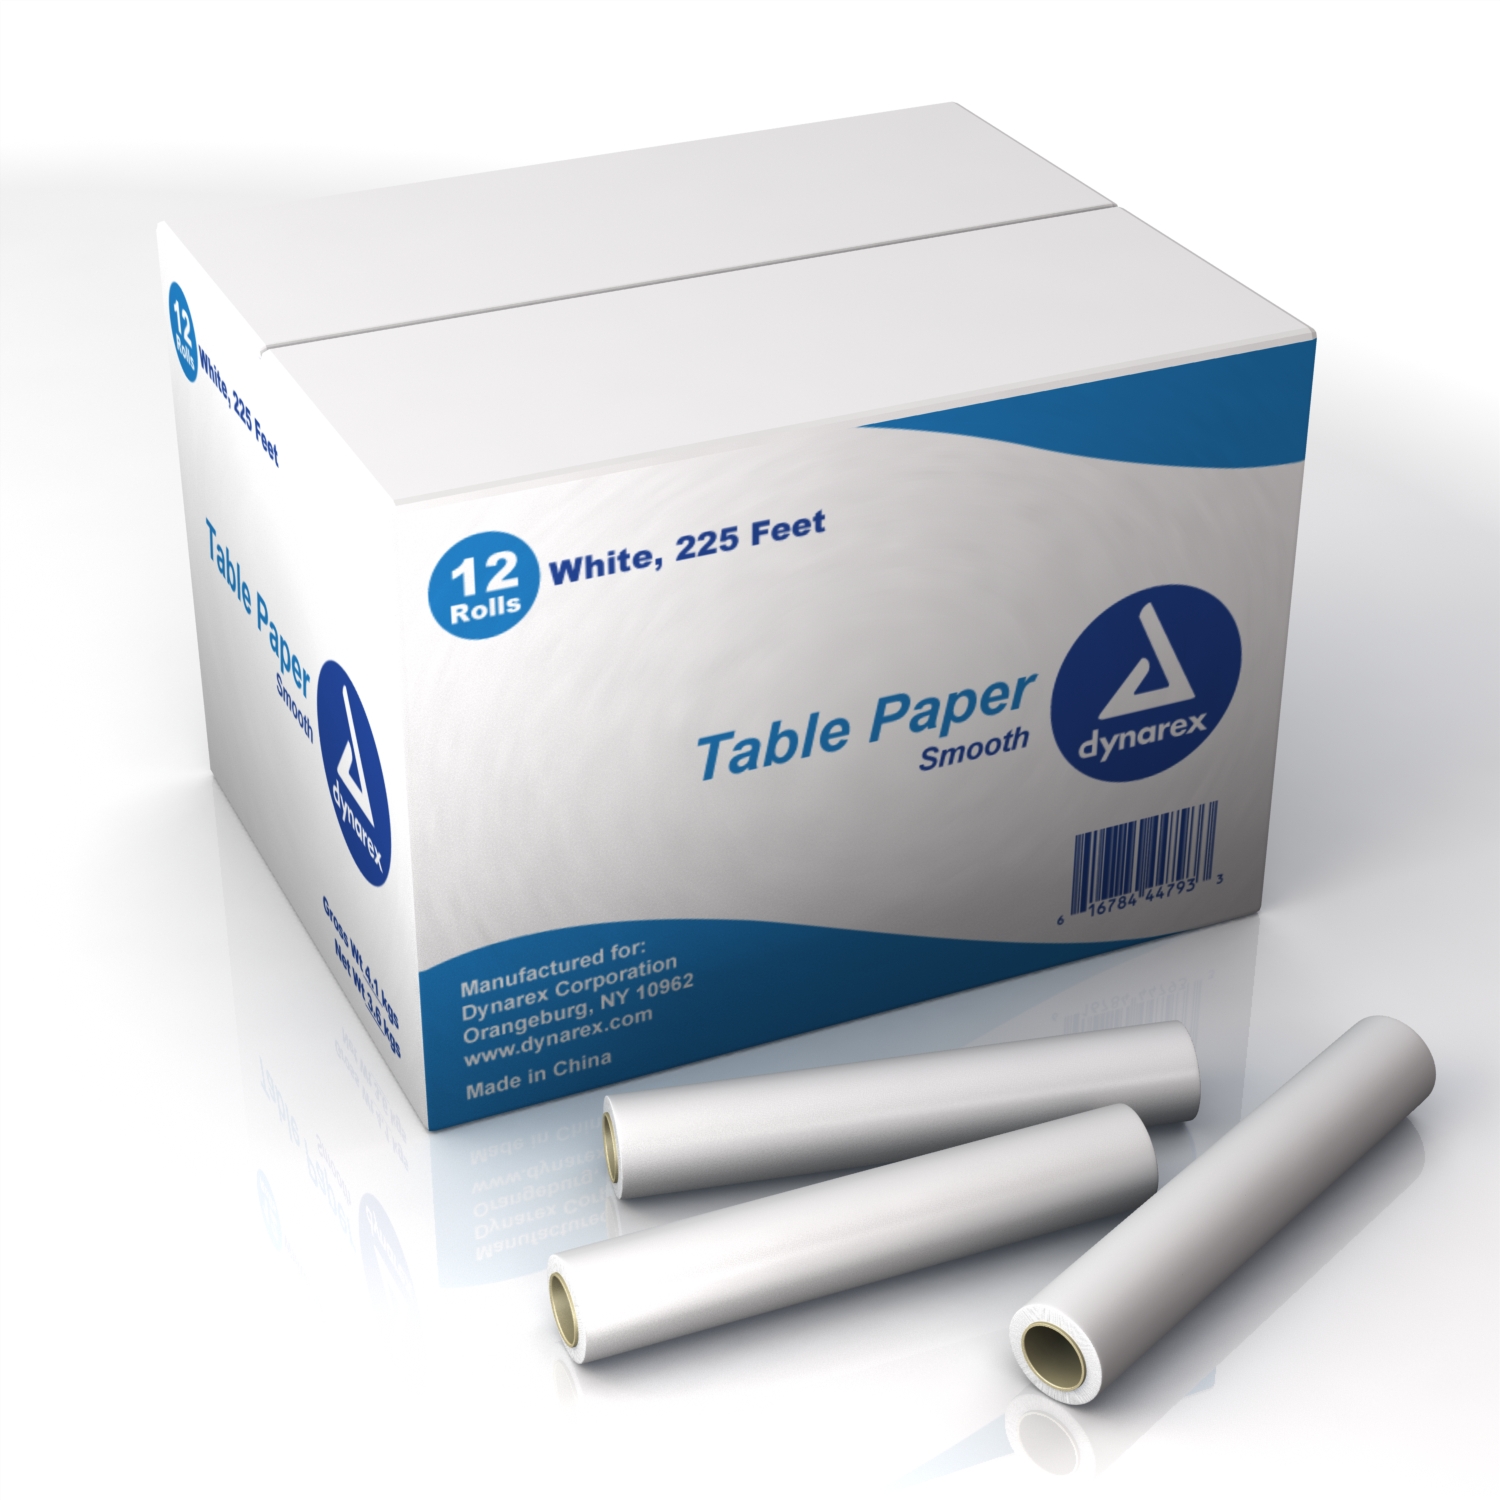 Pediatric Table Paper Smooth - 14" x 225 ft